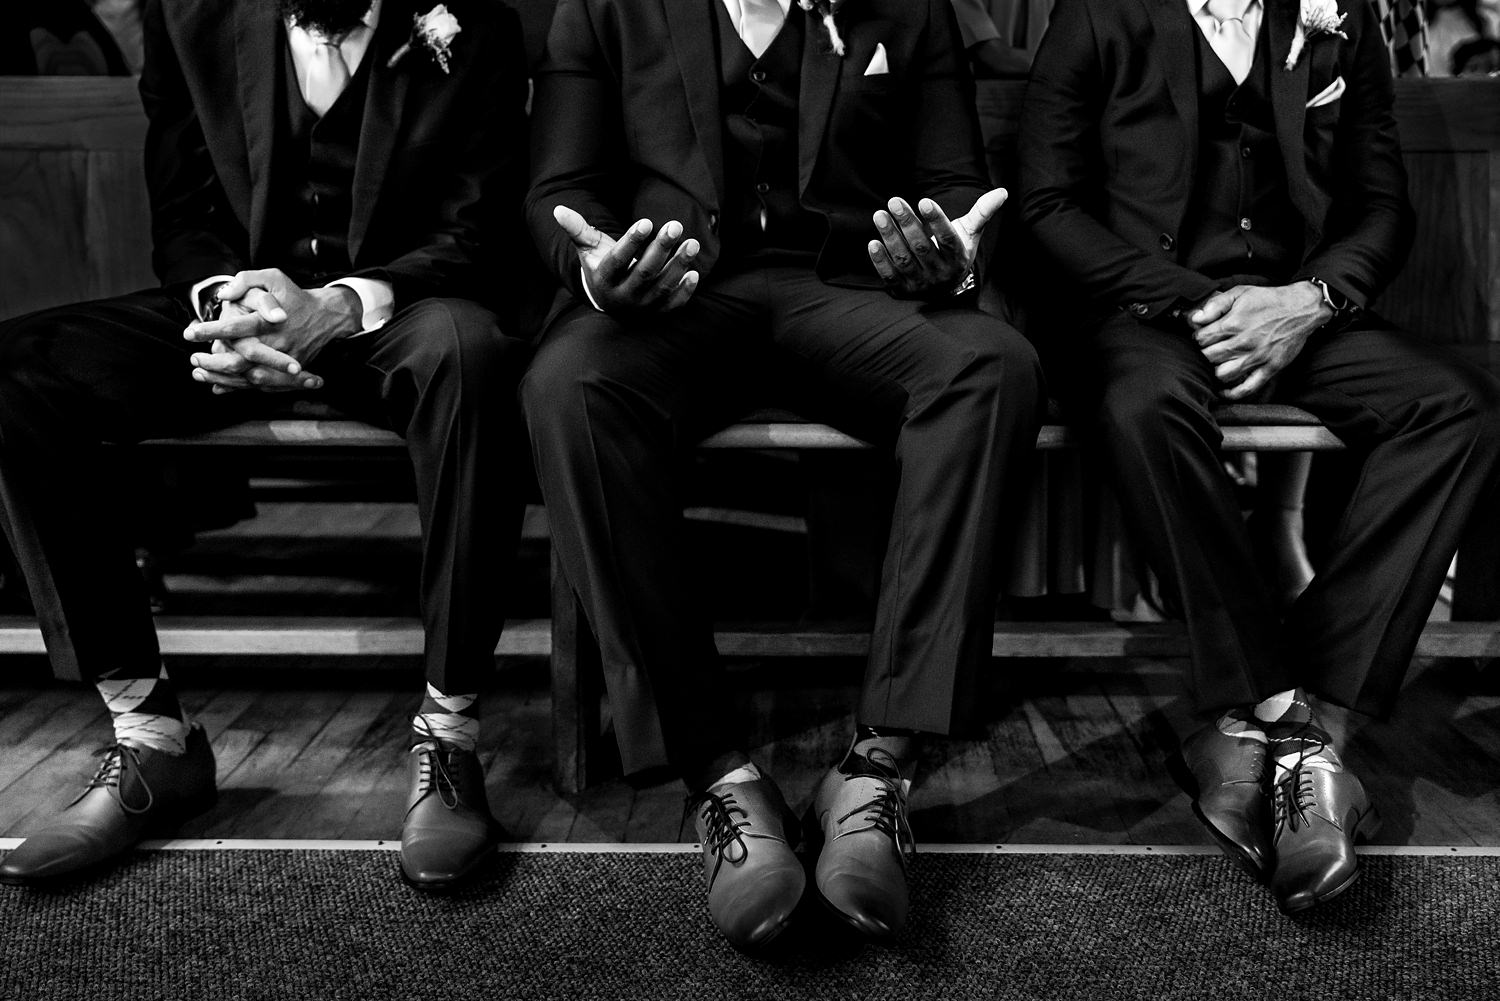 Three groomsmen sit in symmetry during the ceremony prayer, the middle one with palms up in praise.